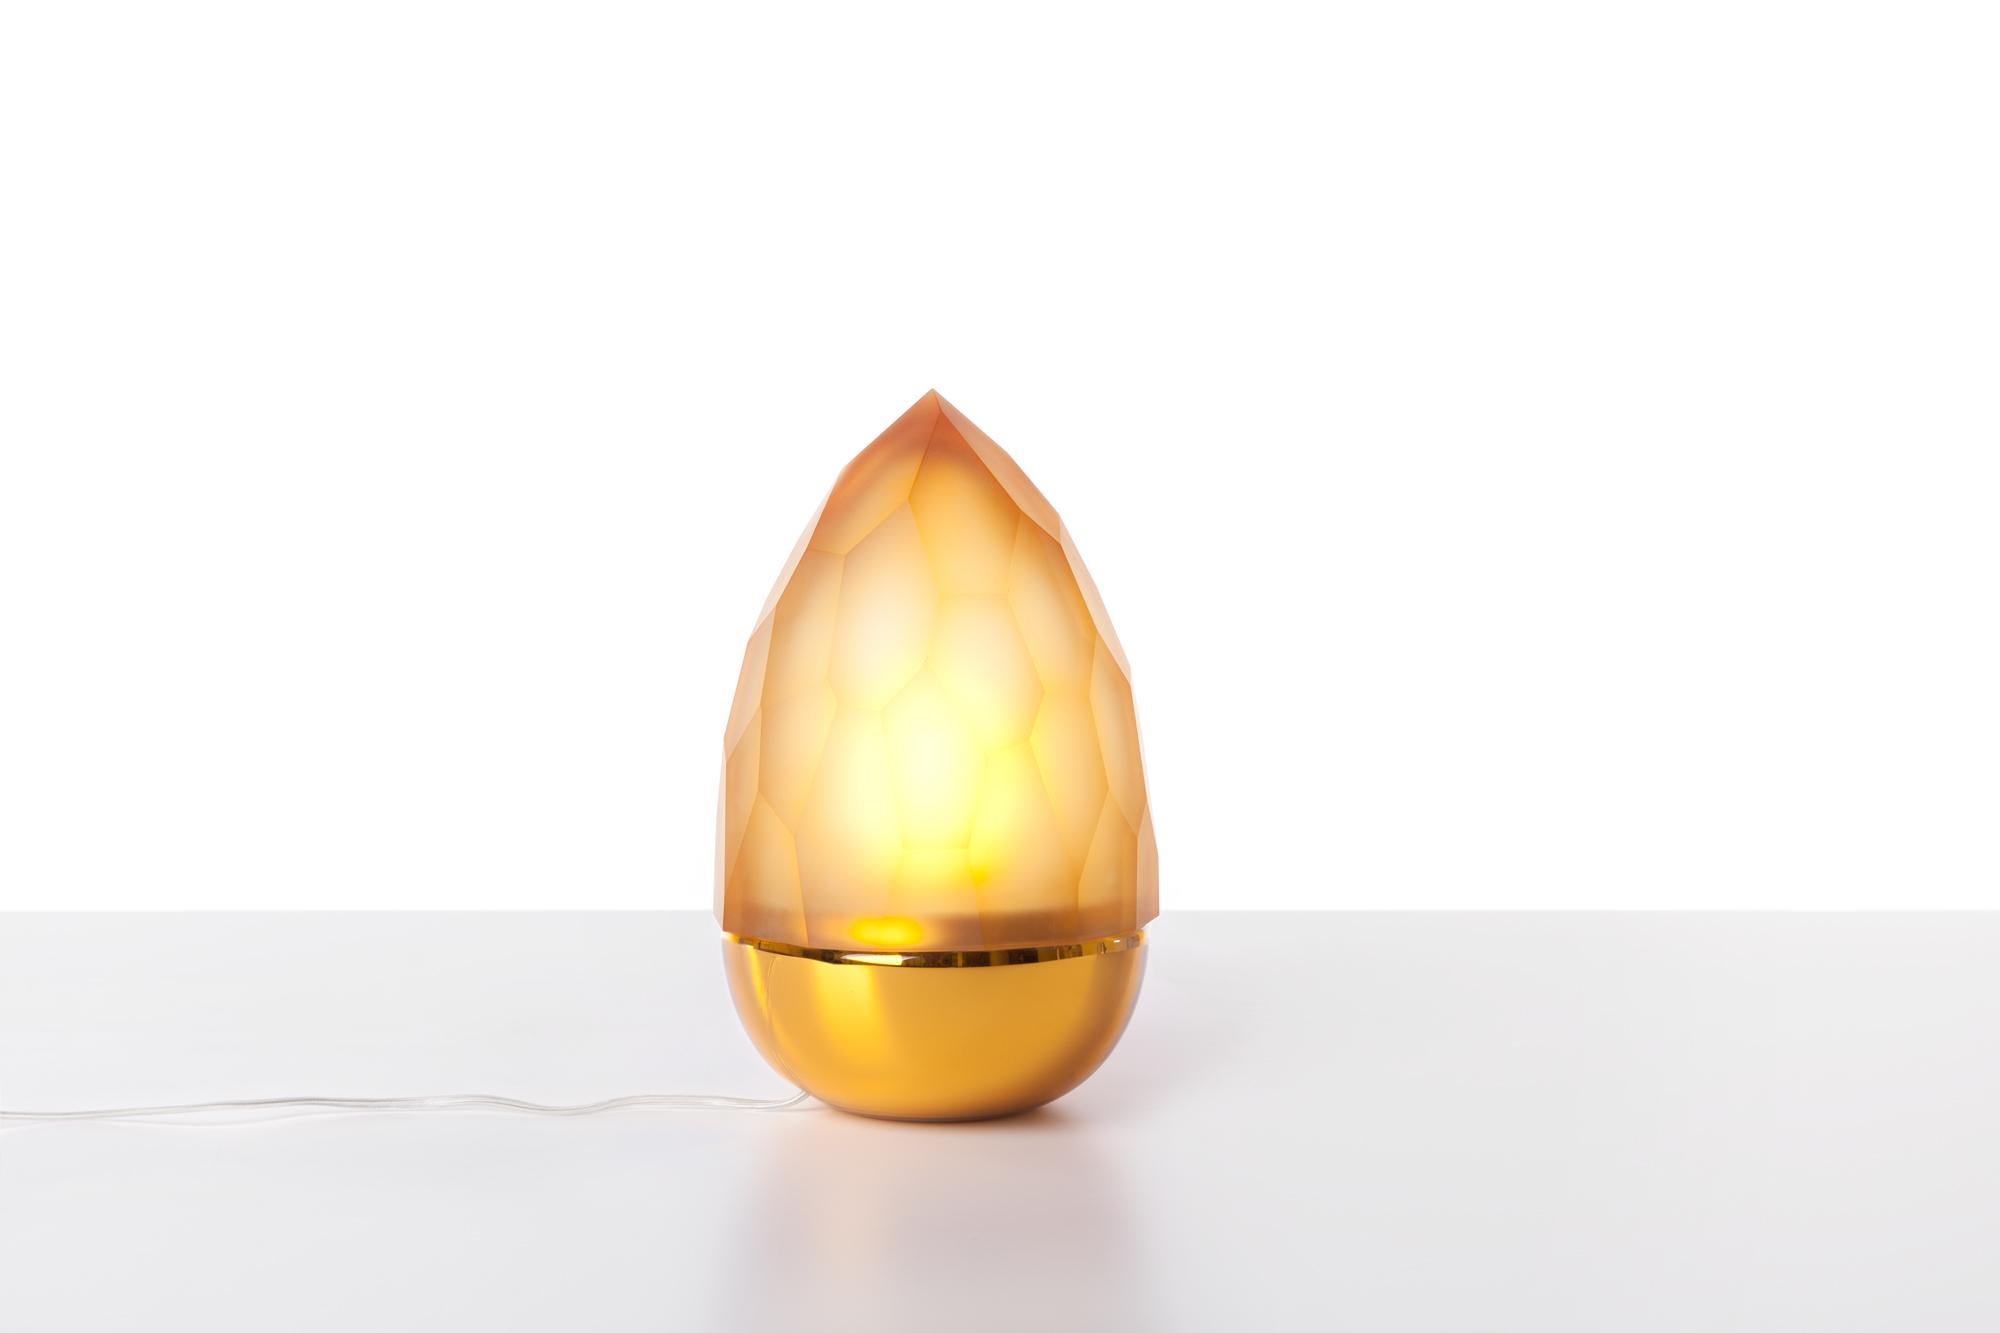 Amber and gold Mr. Flame table lamp by Dechem Studio.
Dimensions: D 18 x H 28 cm.
Materials: glass.
Also available: different colours available.

Two completely contrasting and differently manufactured glass shapes create Mr. Flame Table Lamp.